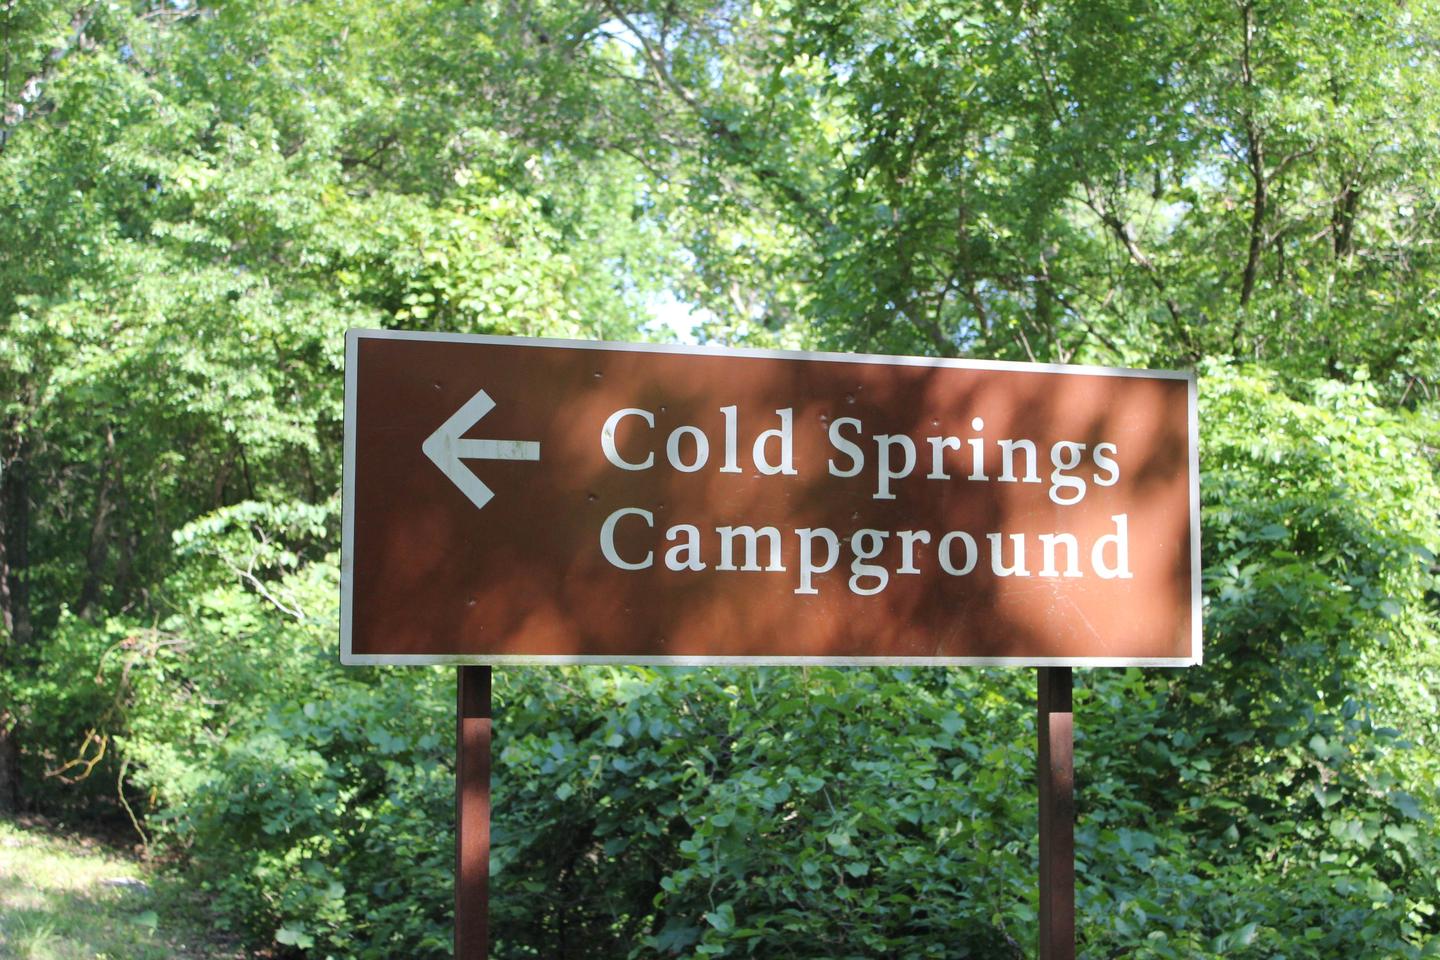 COLD SPRINGS ENTRANCE (OK) CHICKASAW NRACold Springs Campground Sign